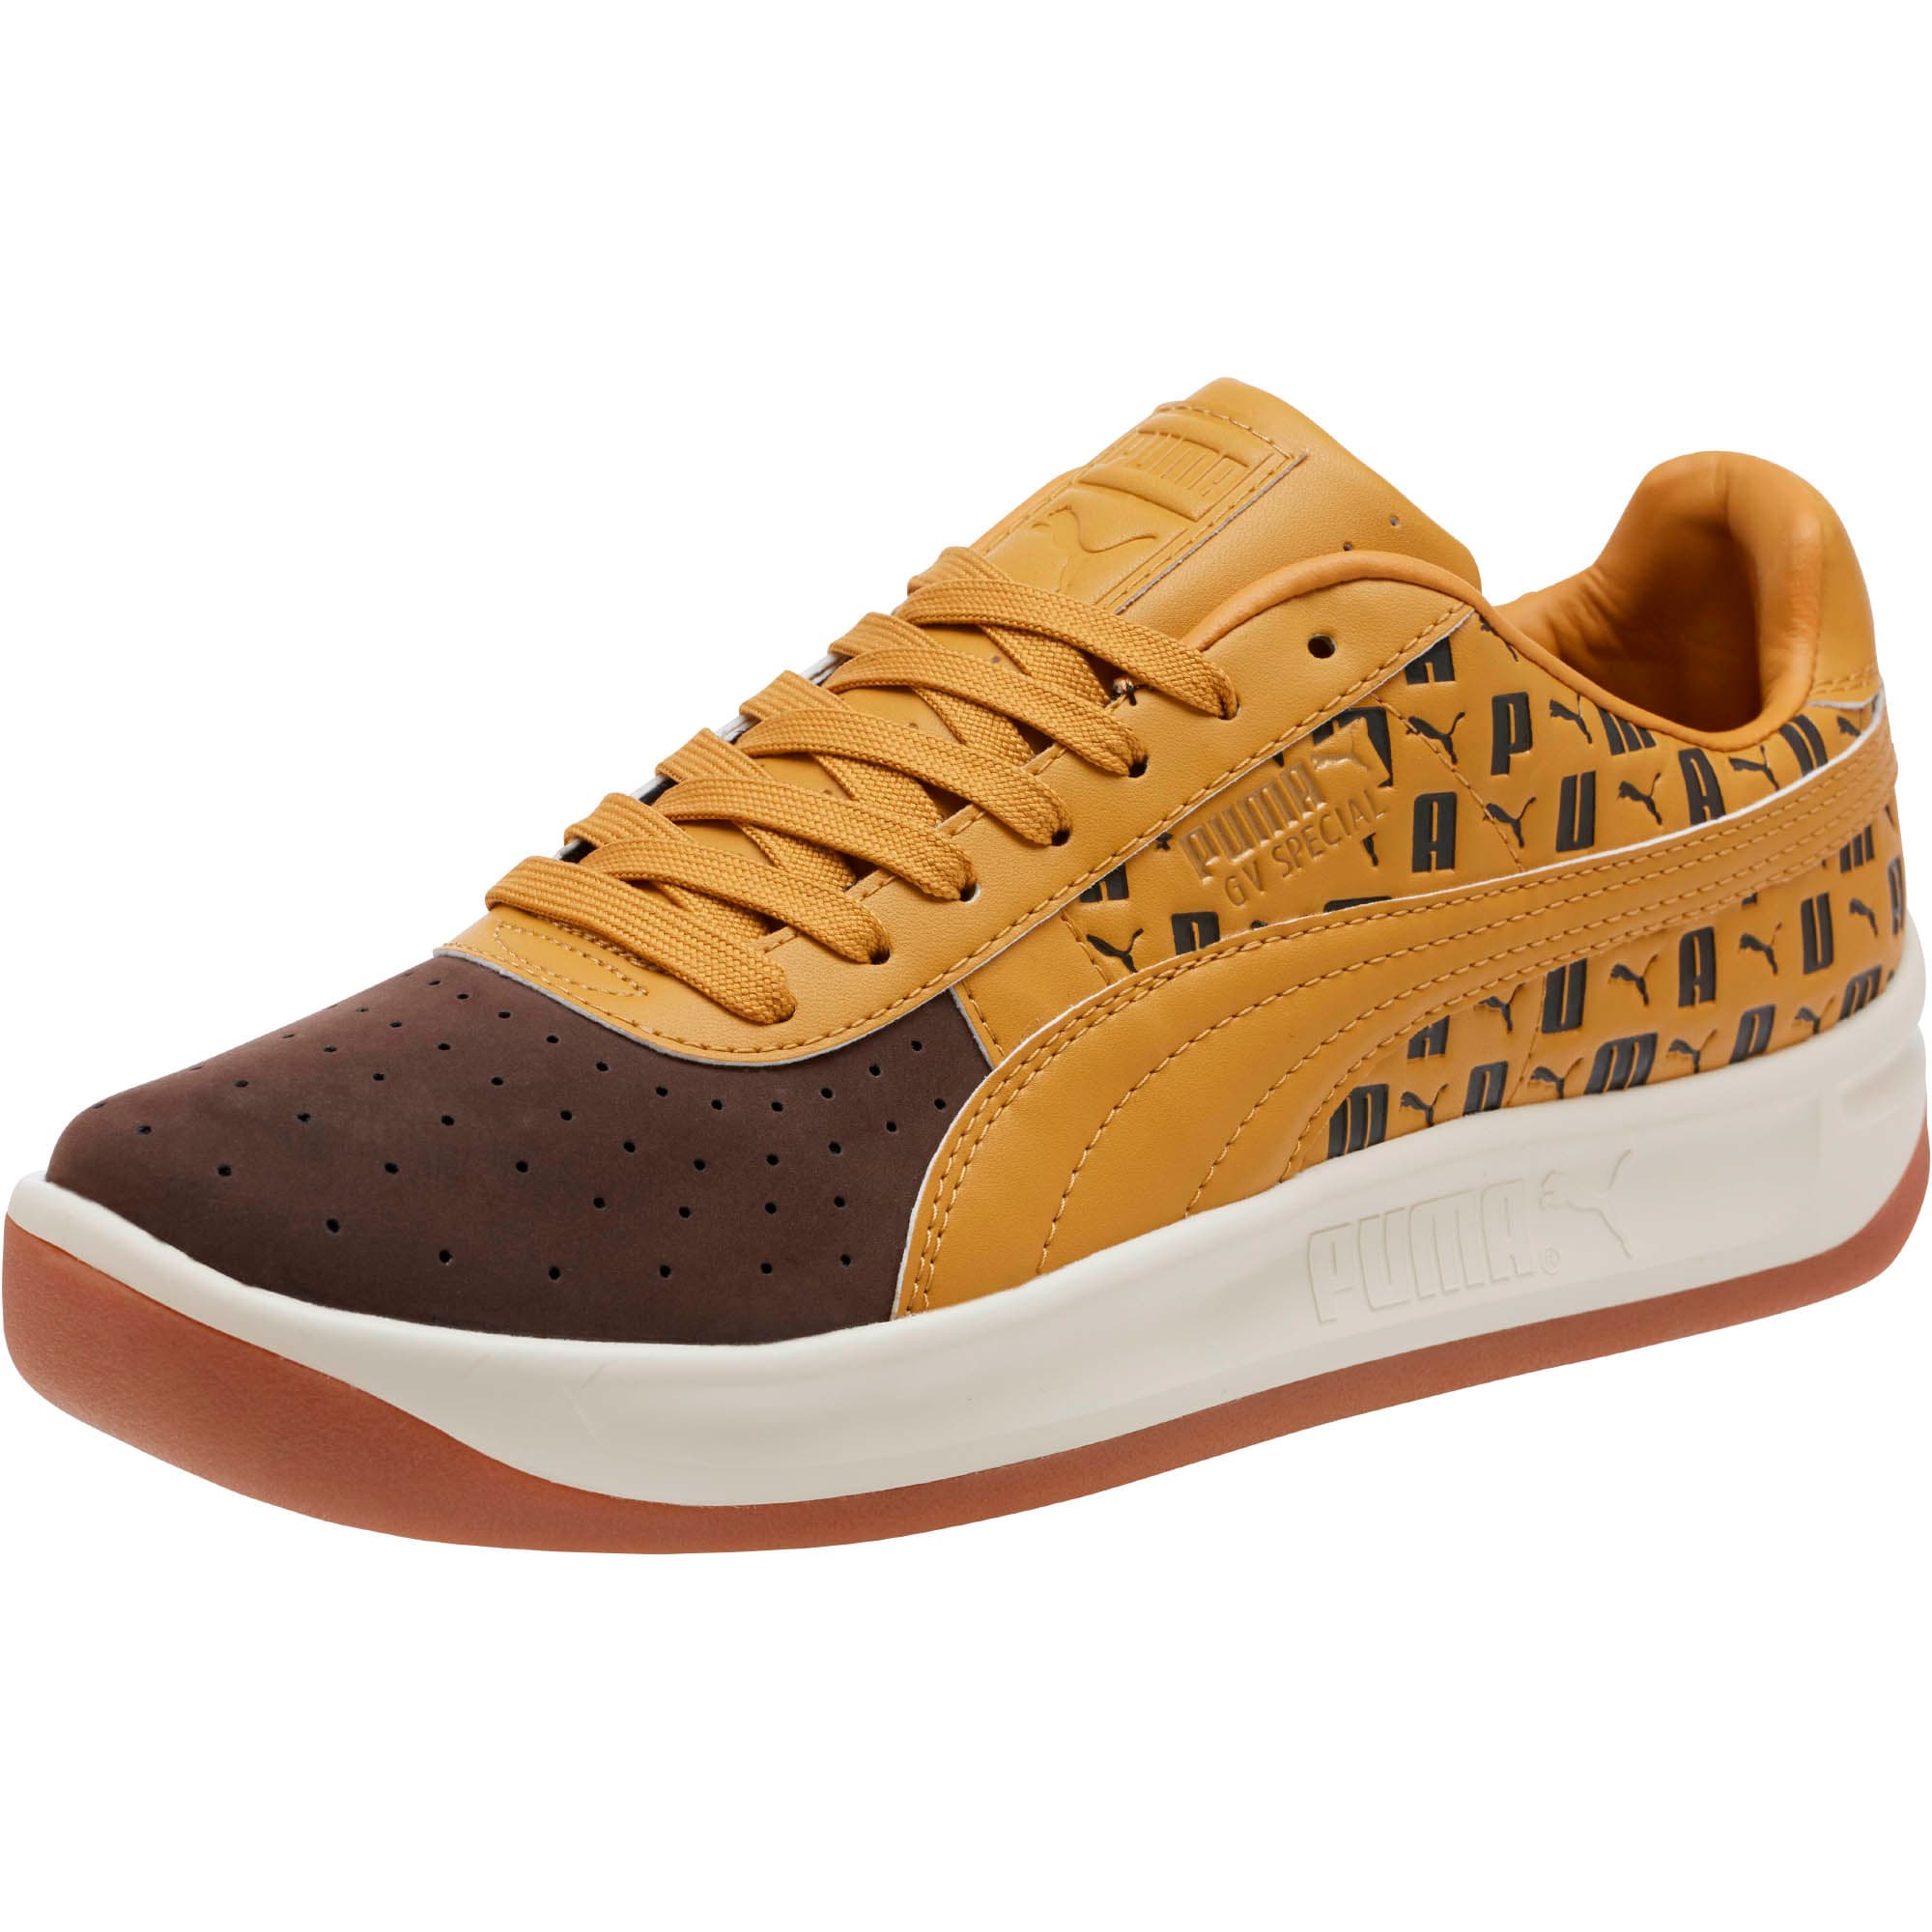 gv special lux men's sneakers